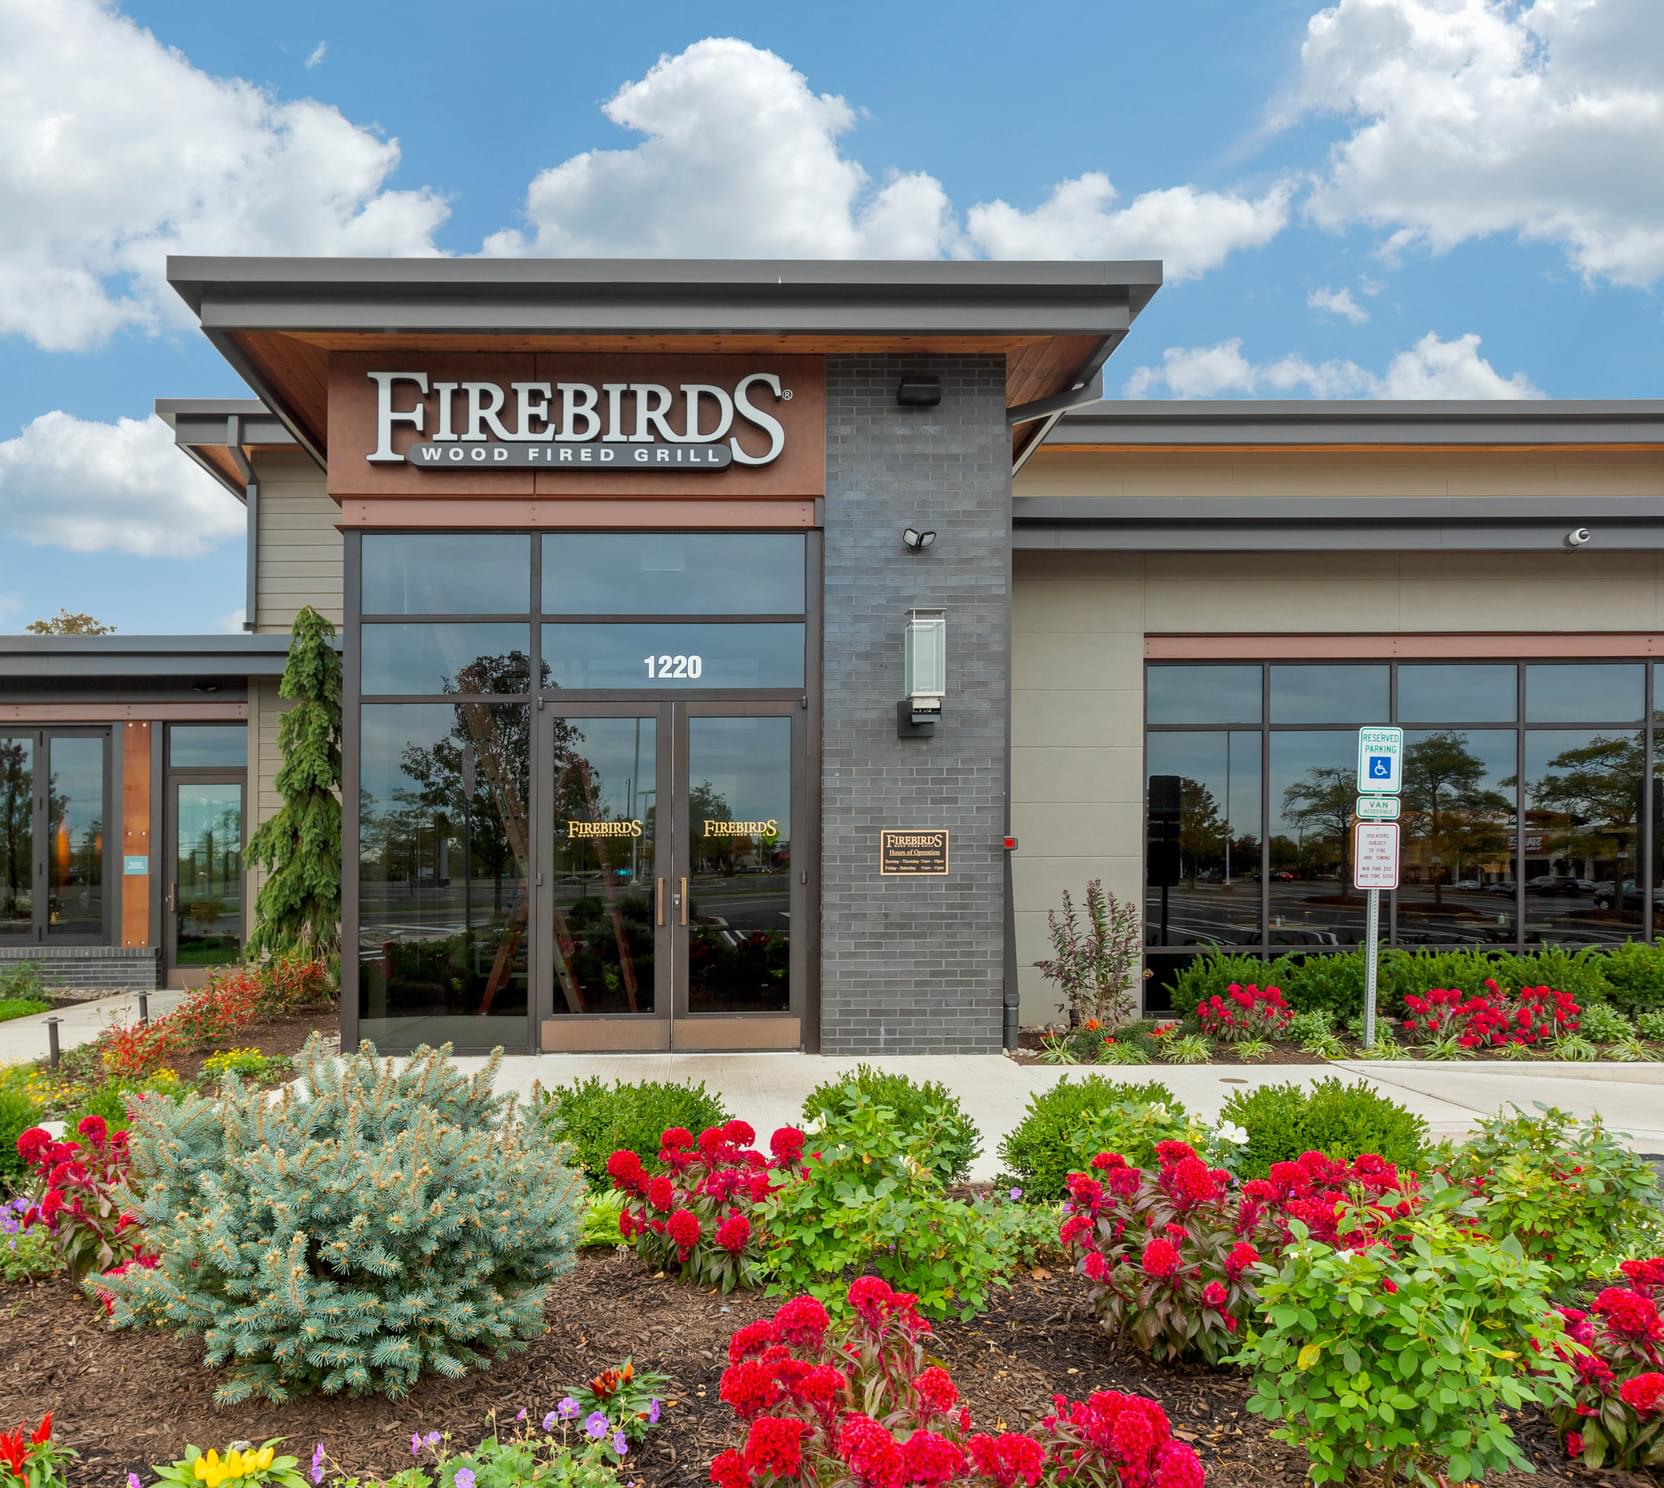 The exterior of Firebirds Wood Fired Grill North Waleslocation.